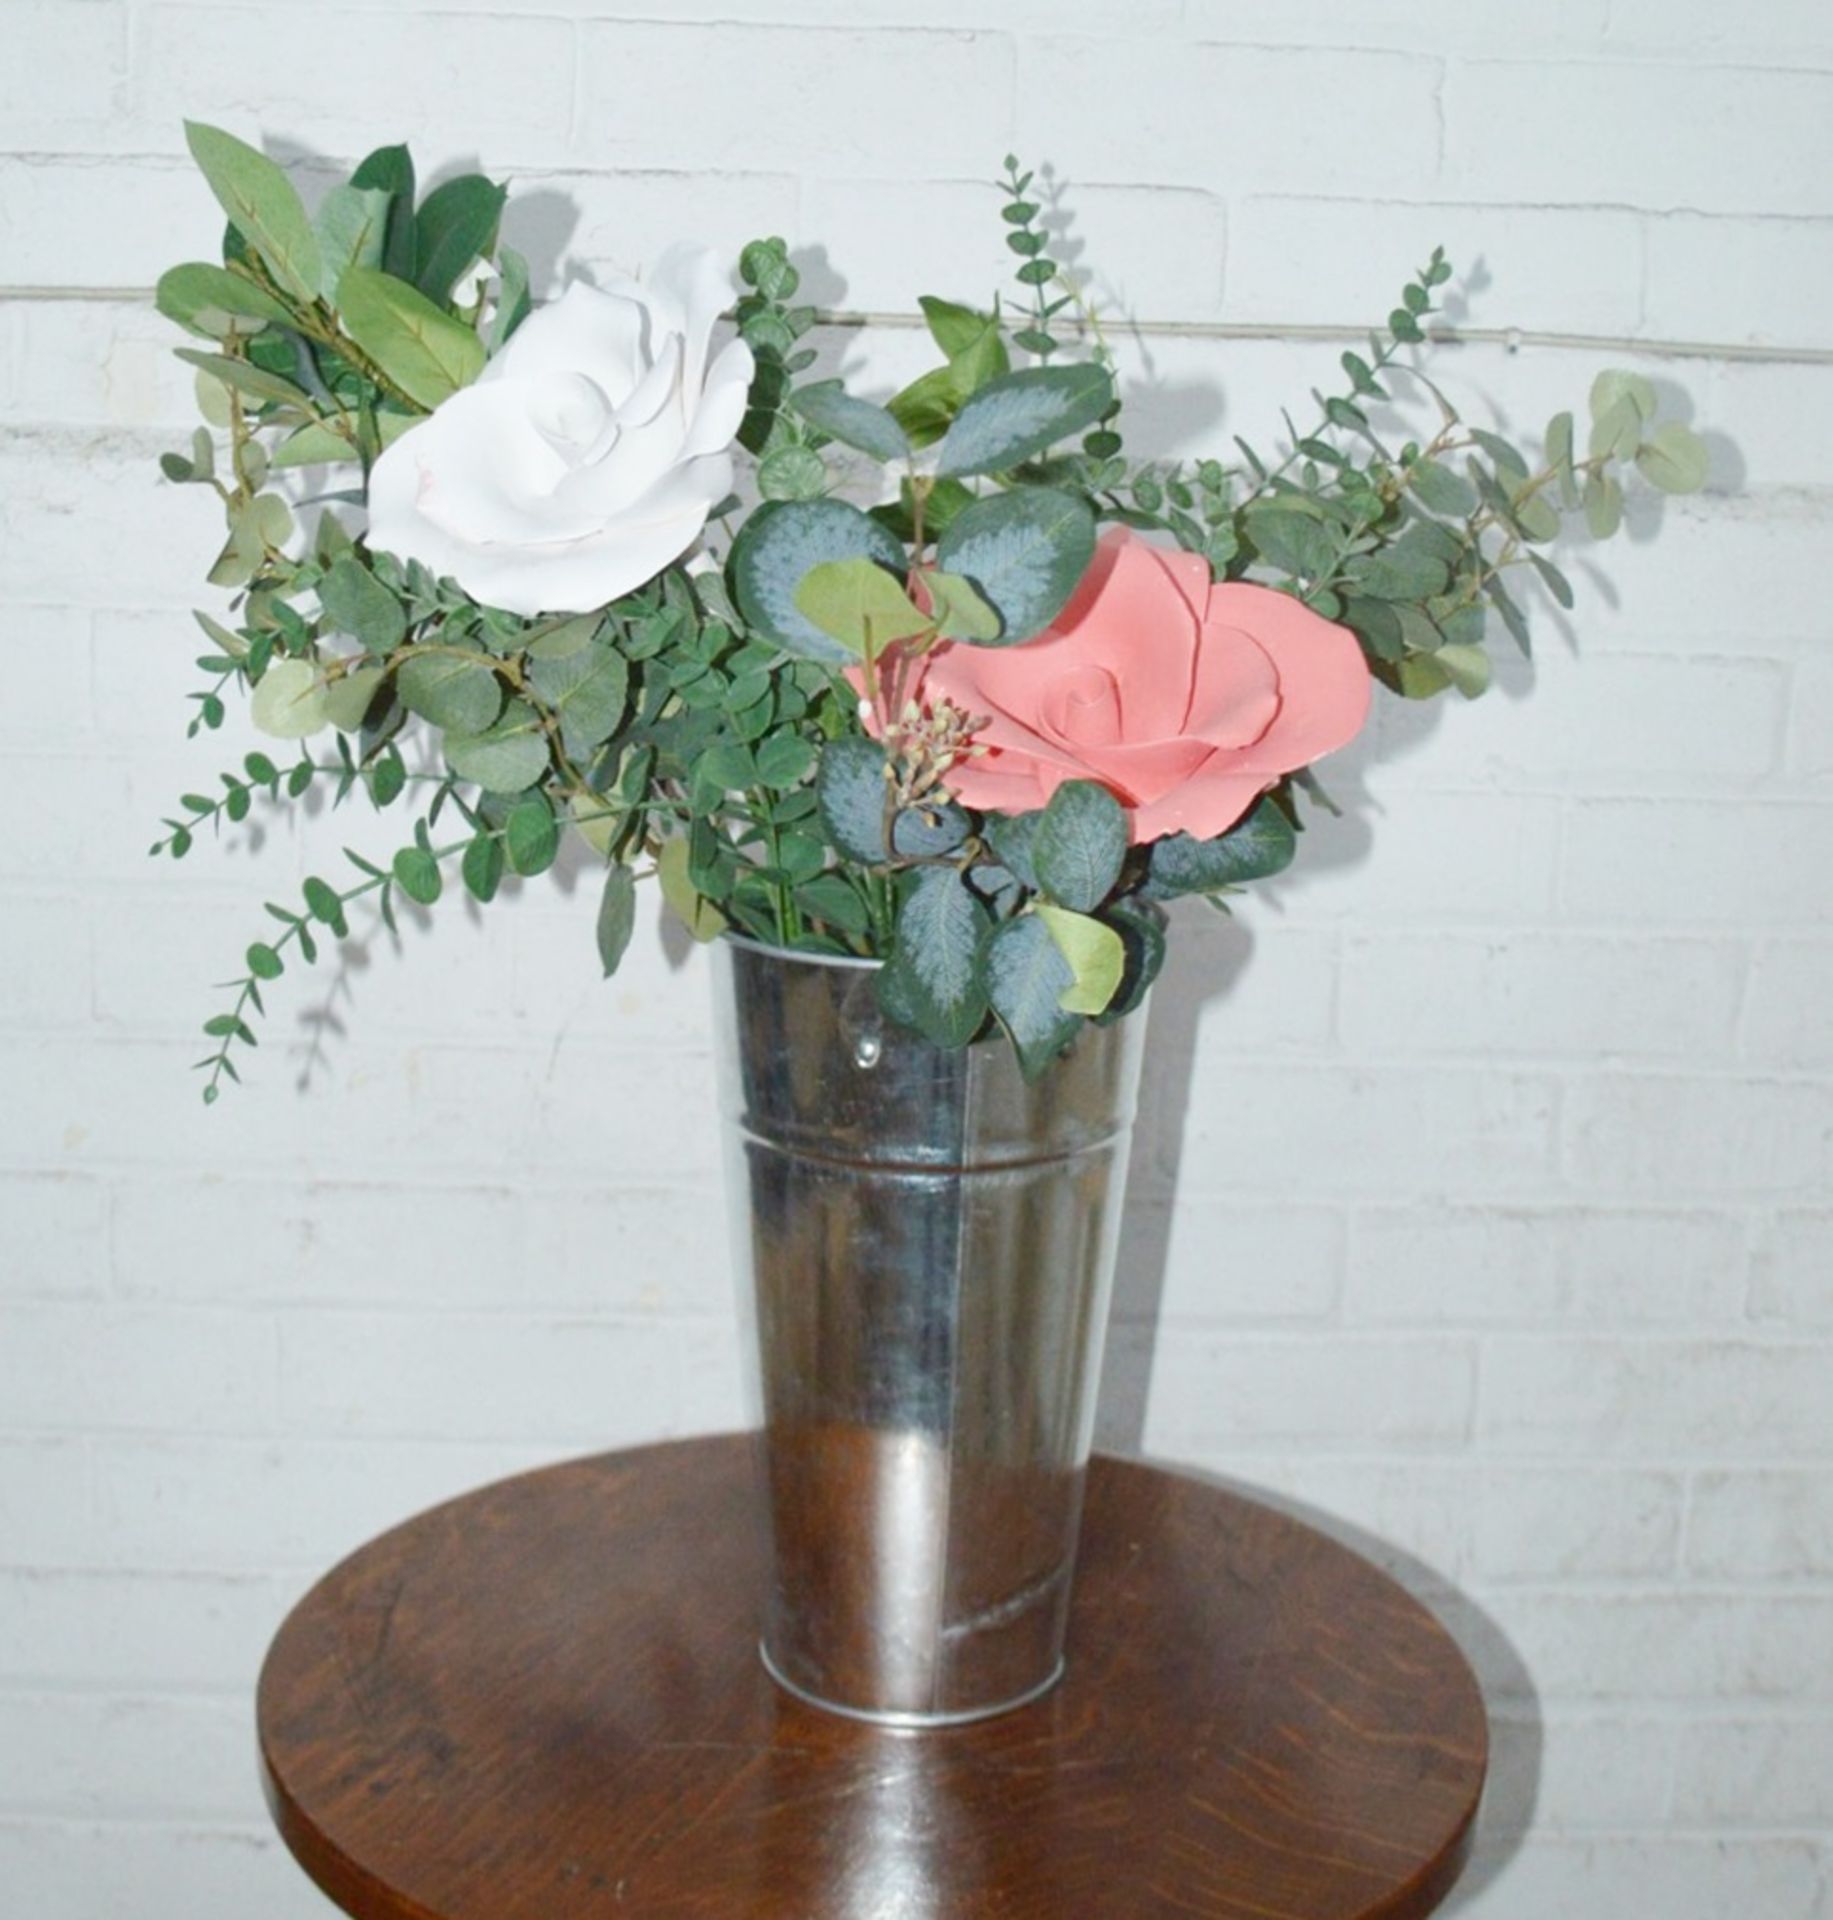 6 x Stunning Commercial Floral Display Bouquets Featuring Handmade Clay Roses and Silk Sprays - Ref: - Image 13 of 13